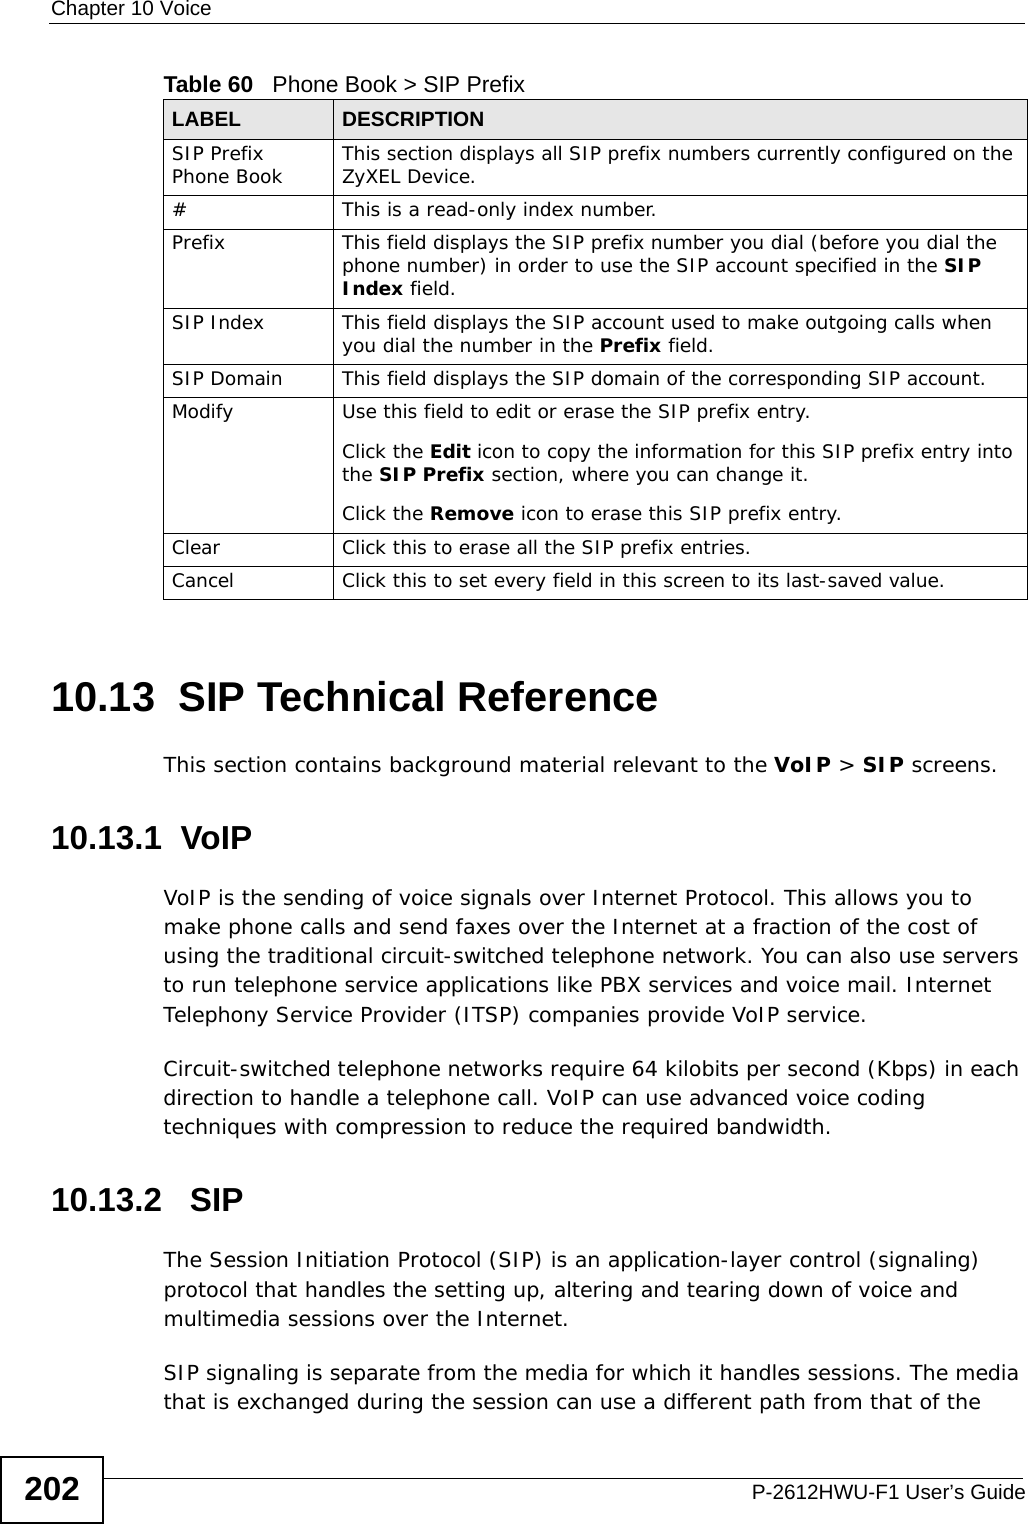 Chapter 10 VoiceP-2612HWU-F1 User’s Guide20210.13  SIP Technical ReferenceThis section contains background material relevant to the VoIP &gt; SIP screens.10.13.1  VoIP VoIP is the sending of voice signals over Internet Protocol. This allows you to make phone calls and send faxes over the Internet at a fraction of the cost of using the traditional circuit-switched telephone network. You can also use servers to run telephone service applications like PBX services and voice mail. Internet Telephony Service Provider (ITSP) companies provide VoIP service. Circuit-switched telephone networks require 64 kilobits per second (Kbps) in each direction to handle a telephone call. VoIP can use advanced voice coding techniques with compression to reduce the required bandwidth. 10.13.2   SIPThe Session Initiation Protocol (SIP) is an application-layer control (signaling) protocol that handles the setting up, altering and tearing down of voice and multimedia sessions over the Internet.SIP signaling is separate from the media for which it handles sessions. The media that is exchanged during the session can use a different path from that of the SIP Prefix Phone Book This section displays all SIP prefix numbers currently configured on the ZyXEL Device.#This is a read-only index number.Prefix This field displays the SIP prefix number you dial (before you dial the phone number) in order to use the SIP account specified in the SIP Index field.SIP Index This field displays the SIP account used to make outgoing calls when you dial the number in the Prefix field.SIP Domain This field displays the SIP domain of the corresponding SIP account.Modify Use this field to edit or erase the SIP prefix entry.Click the Edit icon to copy the information for this SIP prefix entry into the SIP Prefix section, where you can change it.Click the Remove icon to erase this SIP prefix entry.Clear Click this to erase all the SIP prefix entries.Cancel Click this to set every field in this screen to its last-saved value.Table 60   Phone Book &gt; SIP PrefixLABEL DESCRIPTION